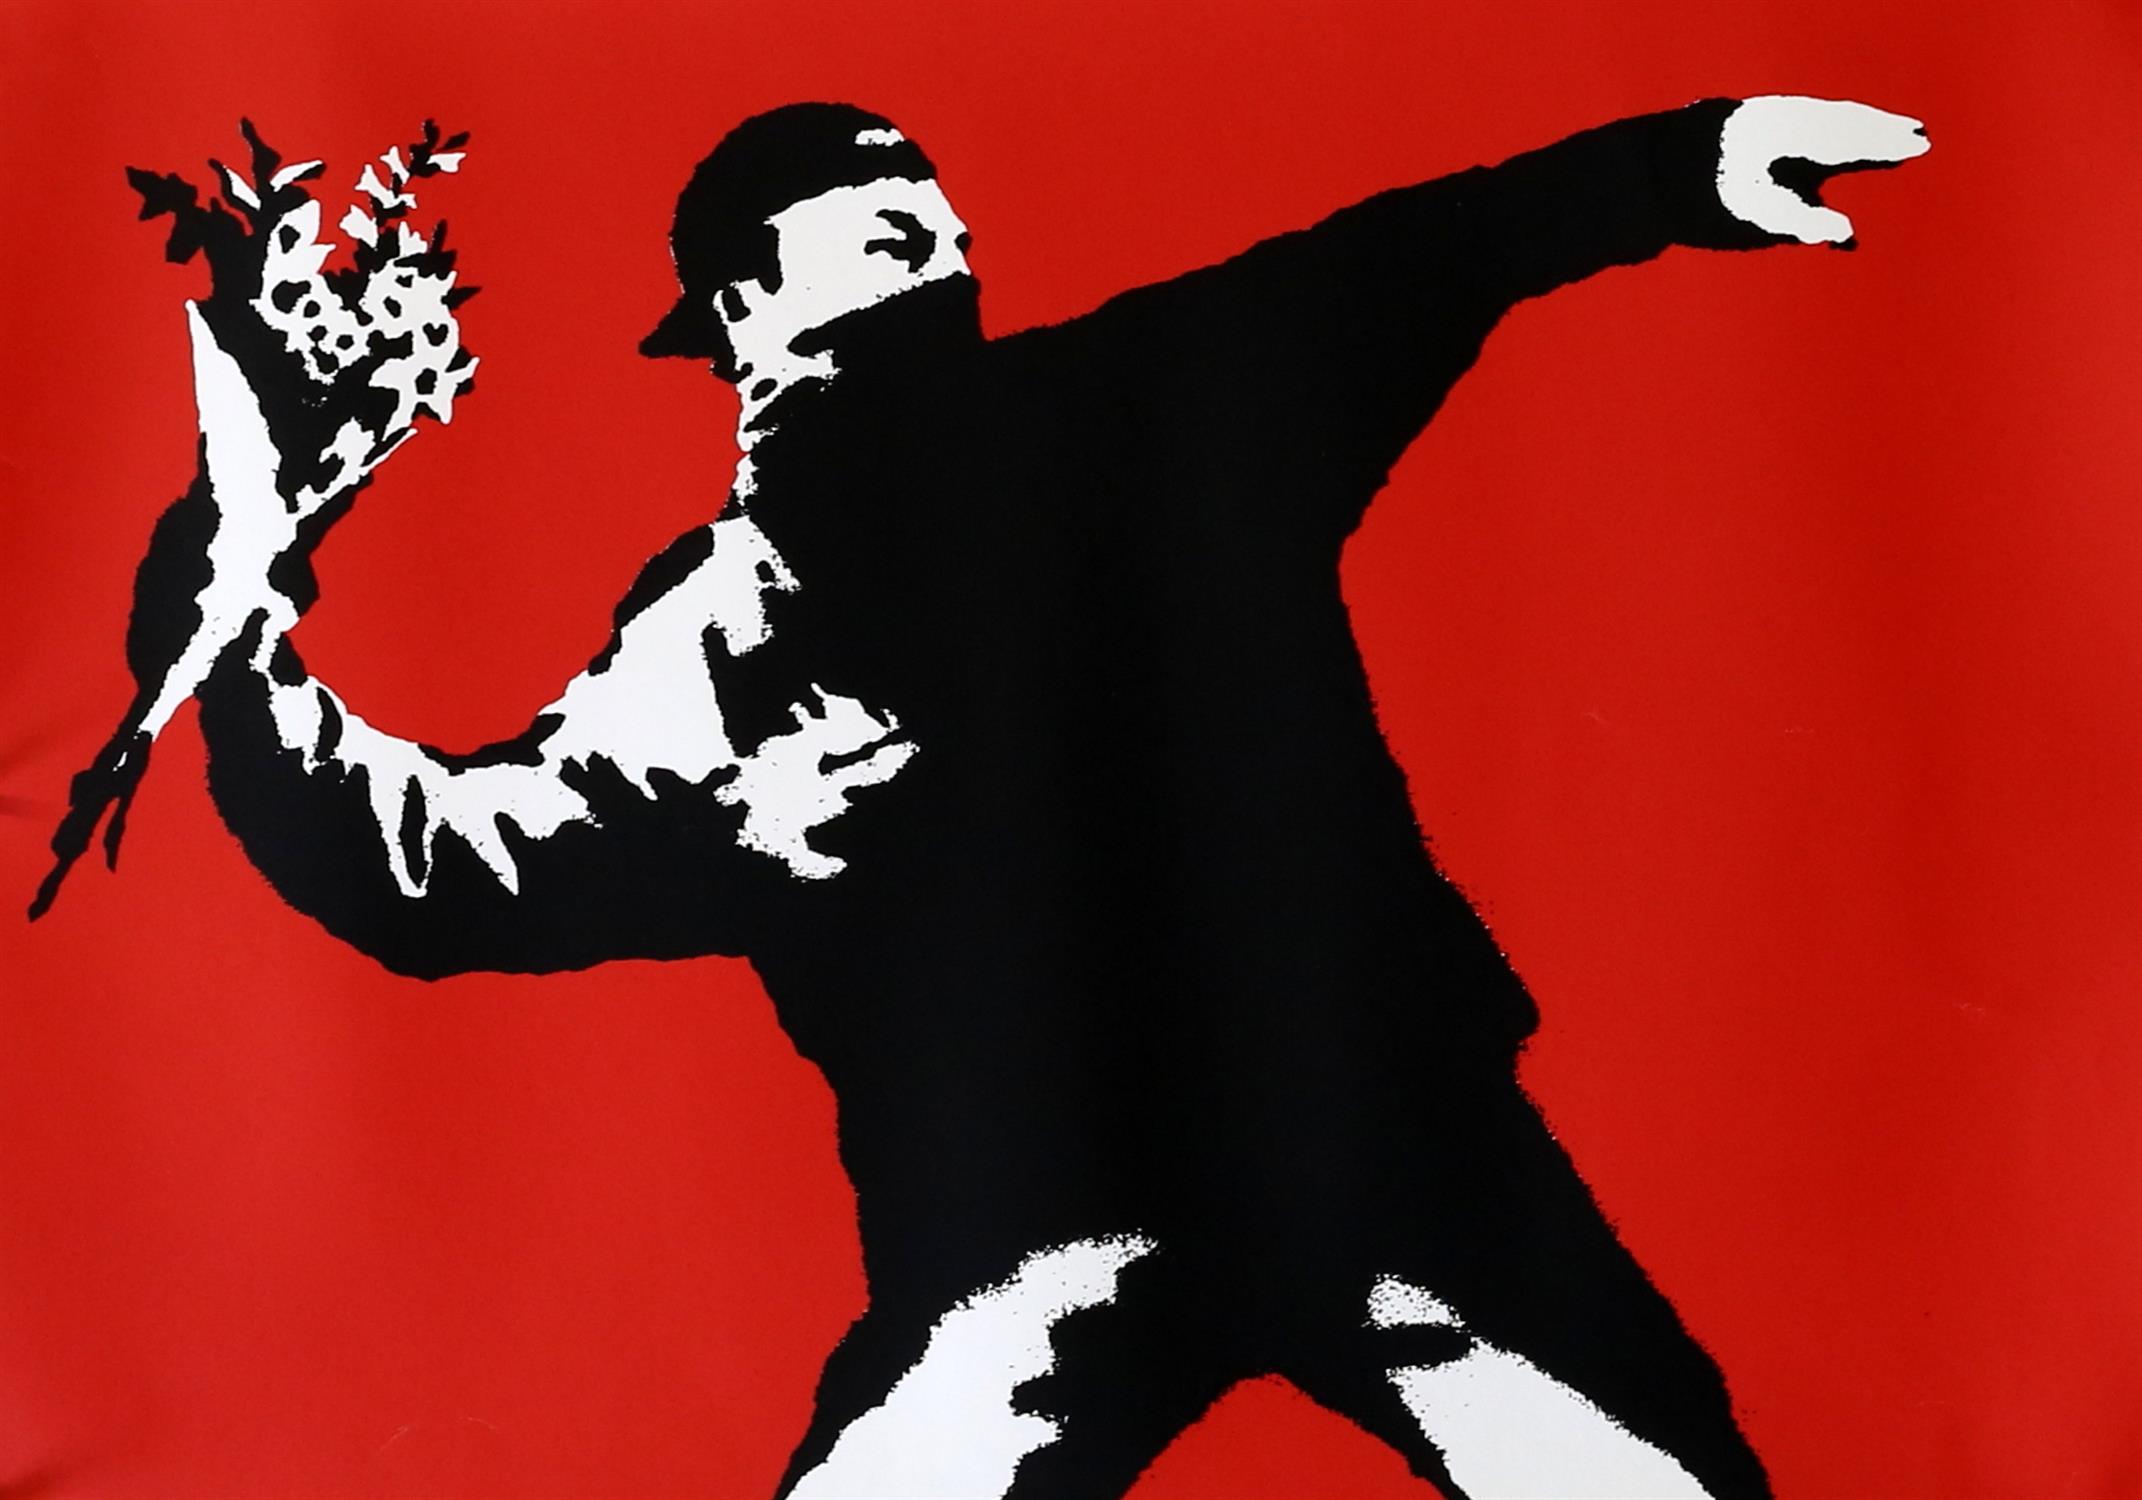 After Banksy, 'Love is in the Air (Flower Thrower)', limited edition screen-print,